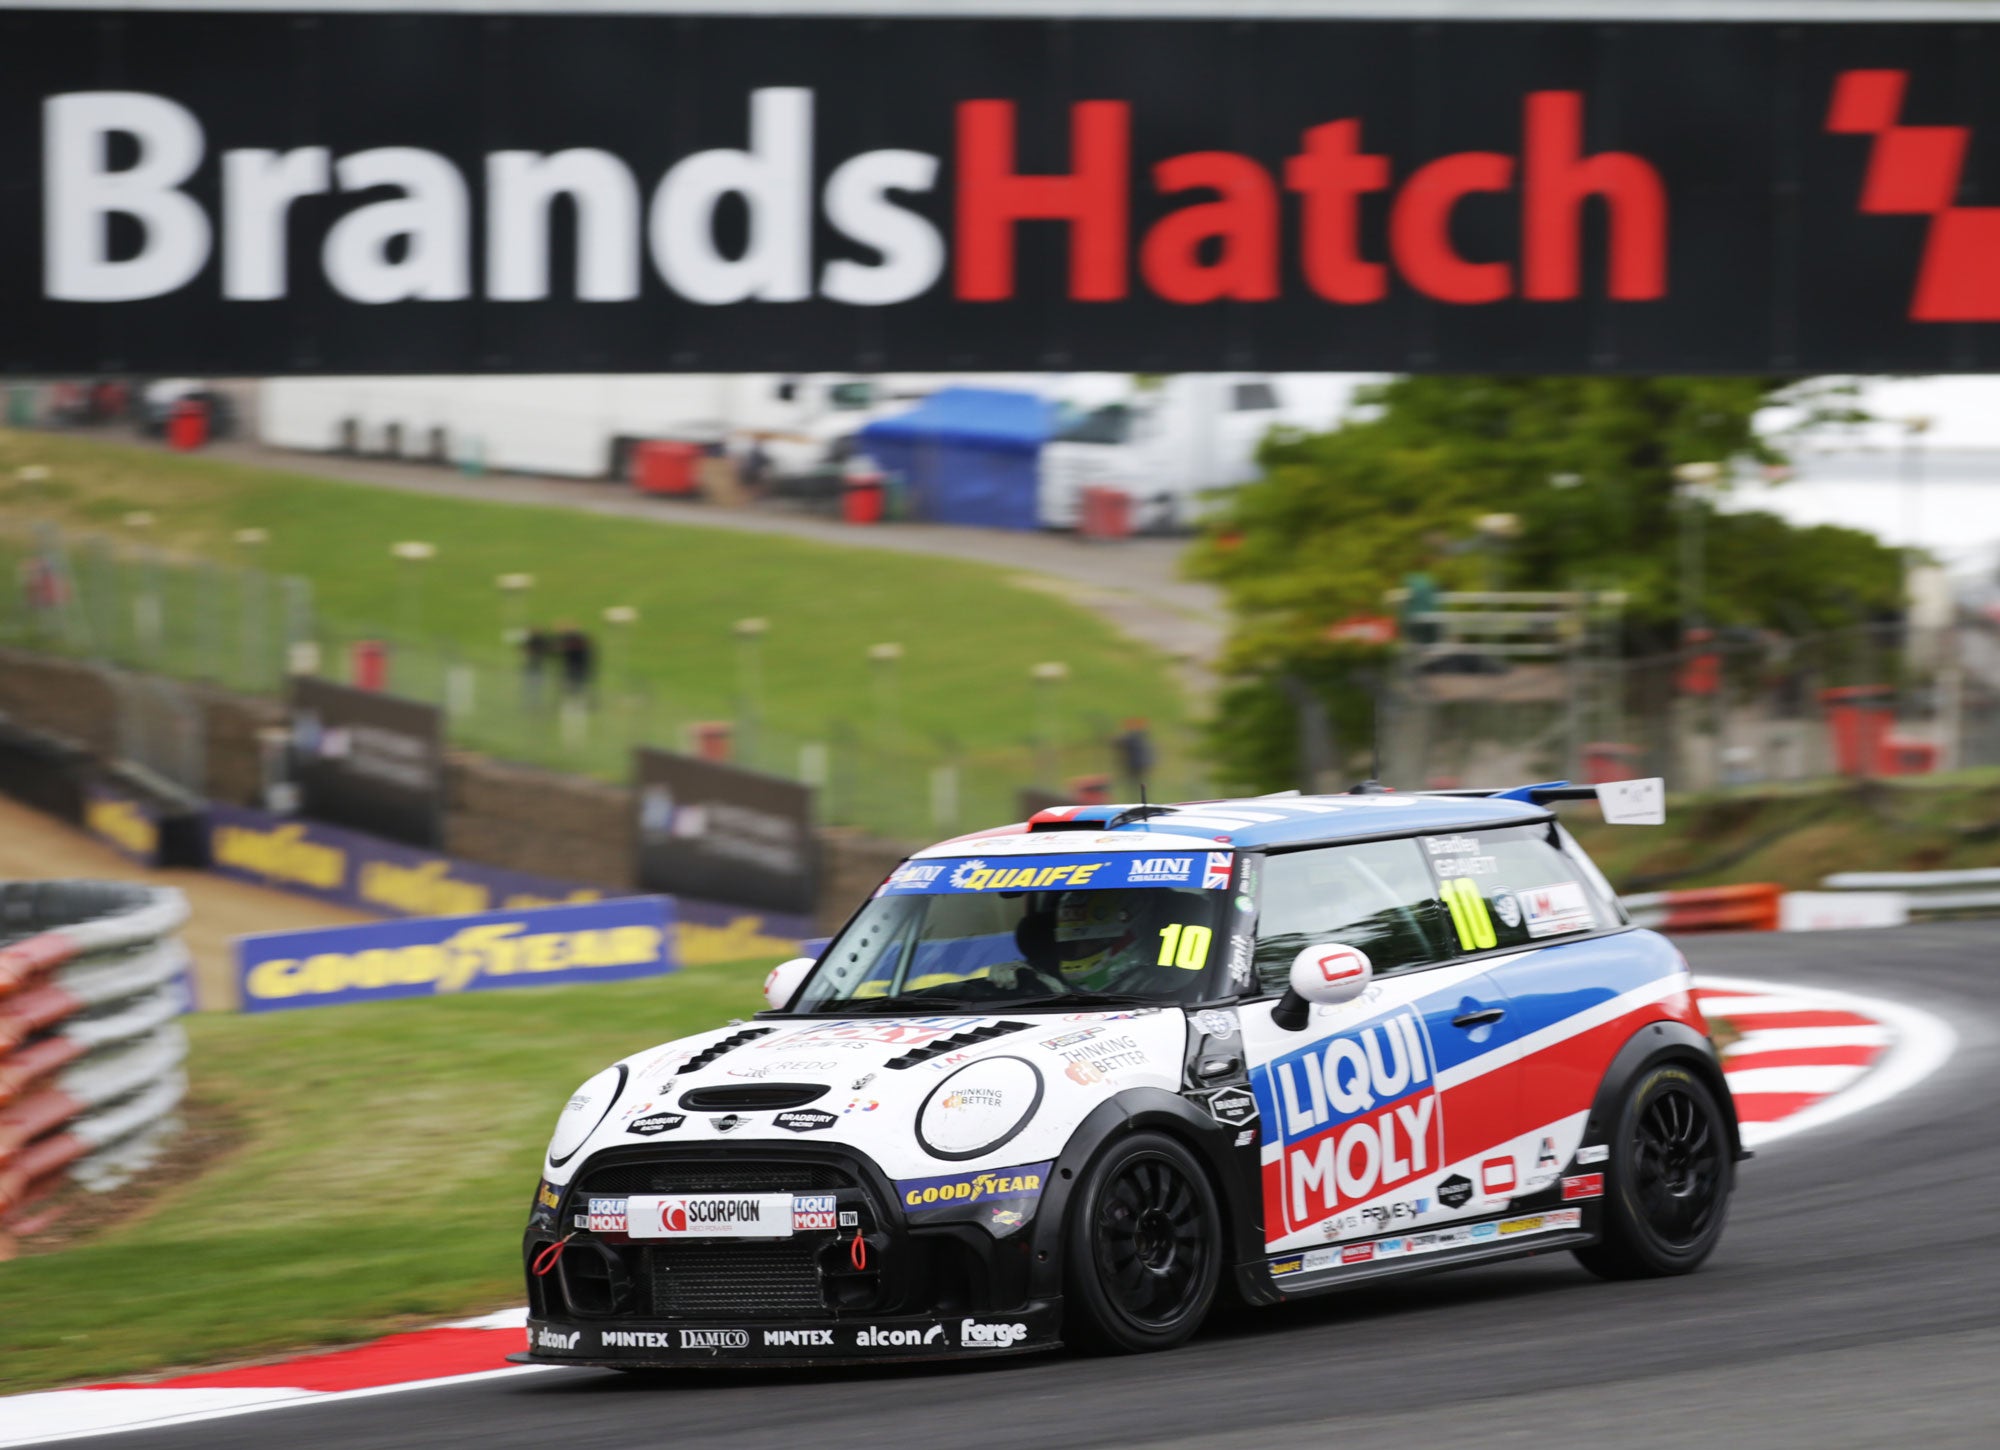 Bradley Gravett son of BTCC British Touring Car Champion Robb Gravett in the MINI Challenge JCW Series at Brands Hatch Indy in 2022 Turning into Druids Graves Motorsport Cooper Racing Driver LIQUI MOLY LM Performance Thinking it Better